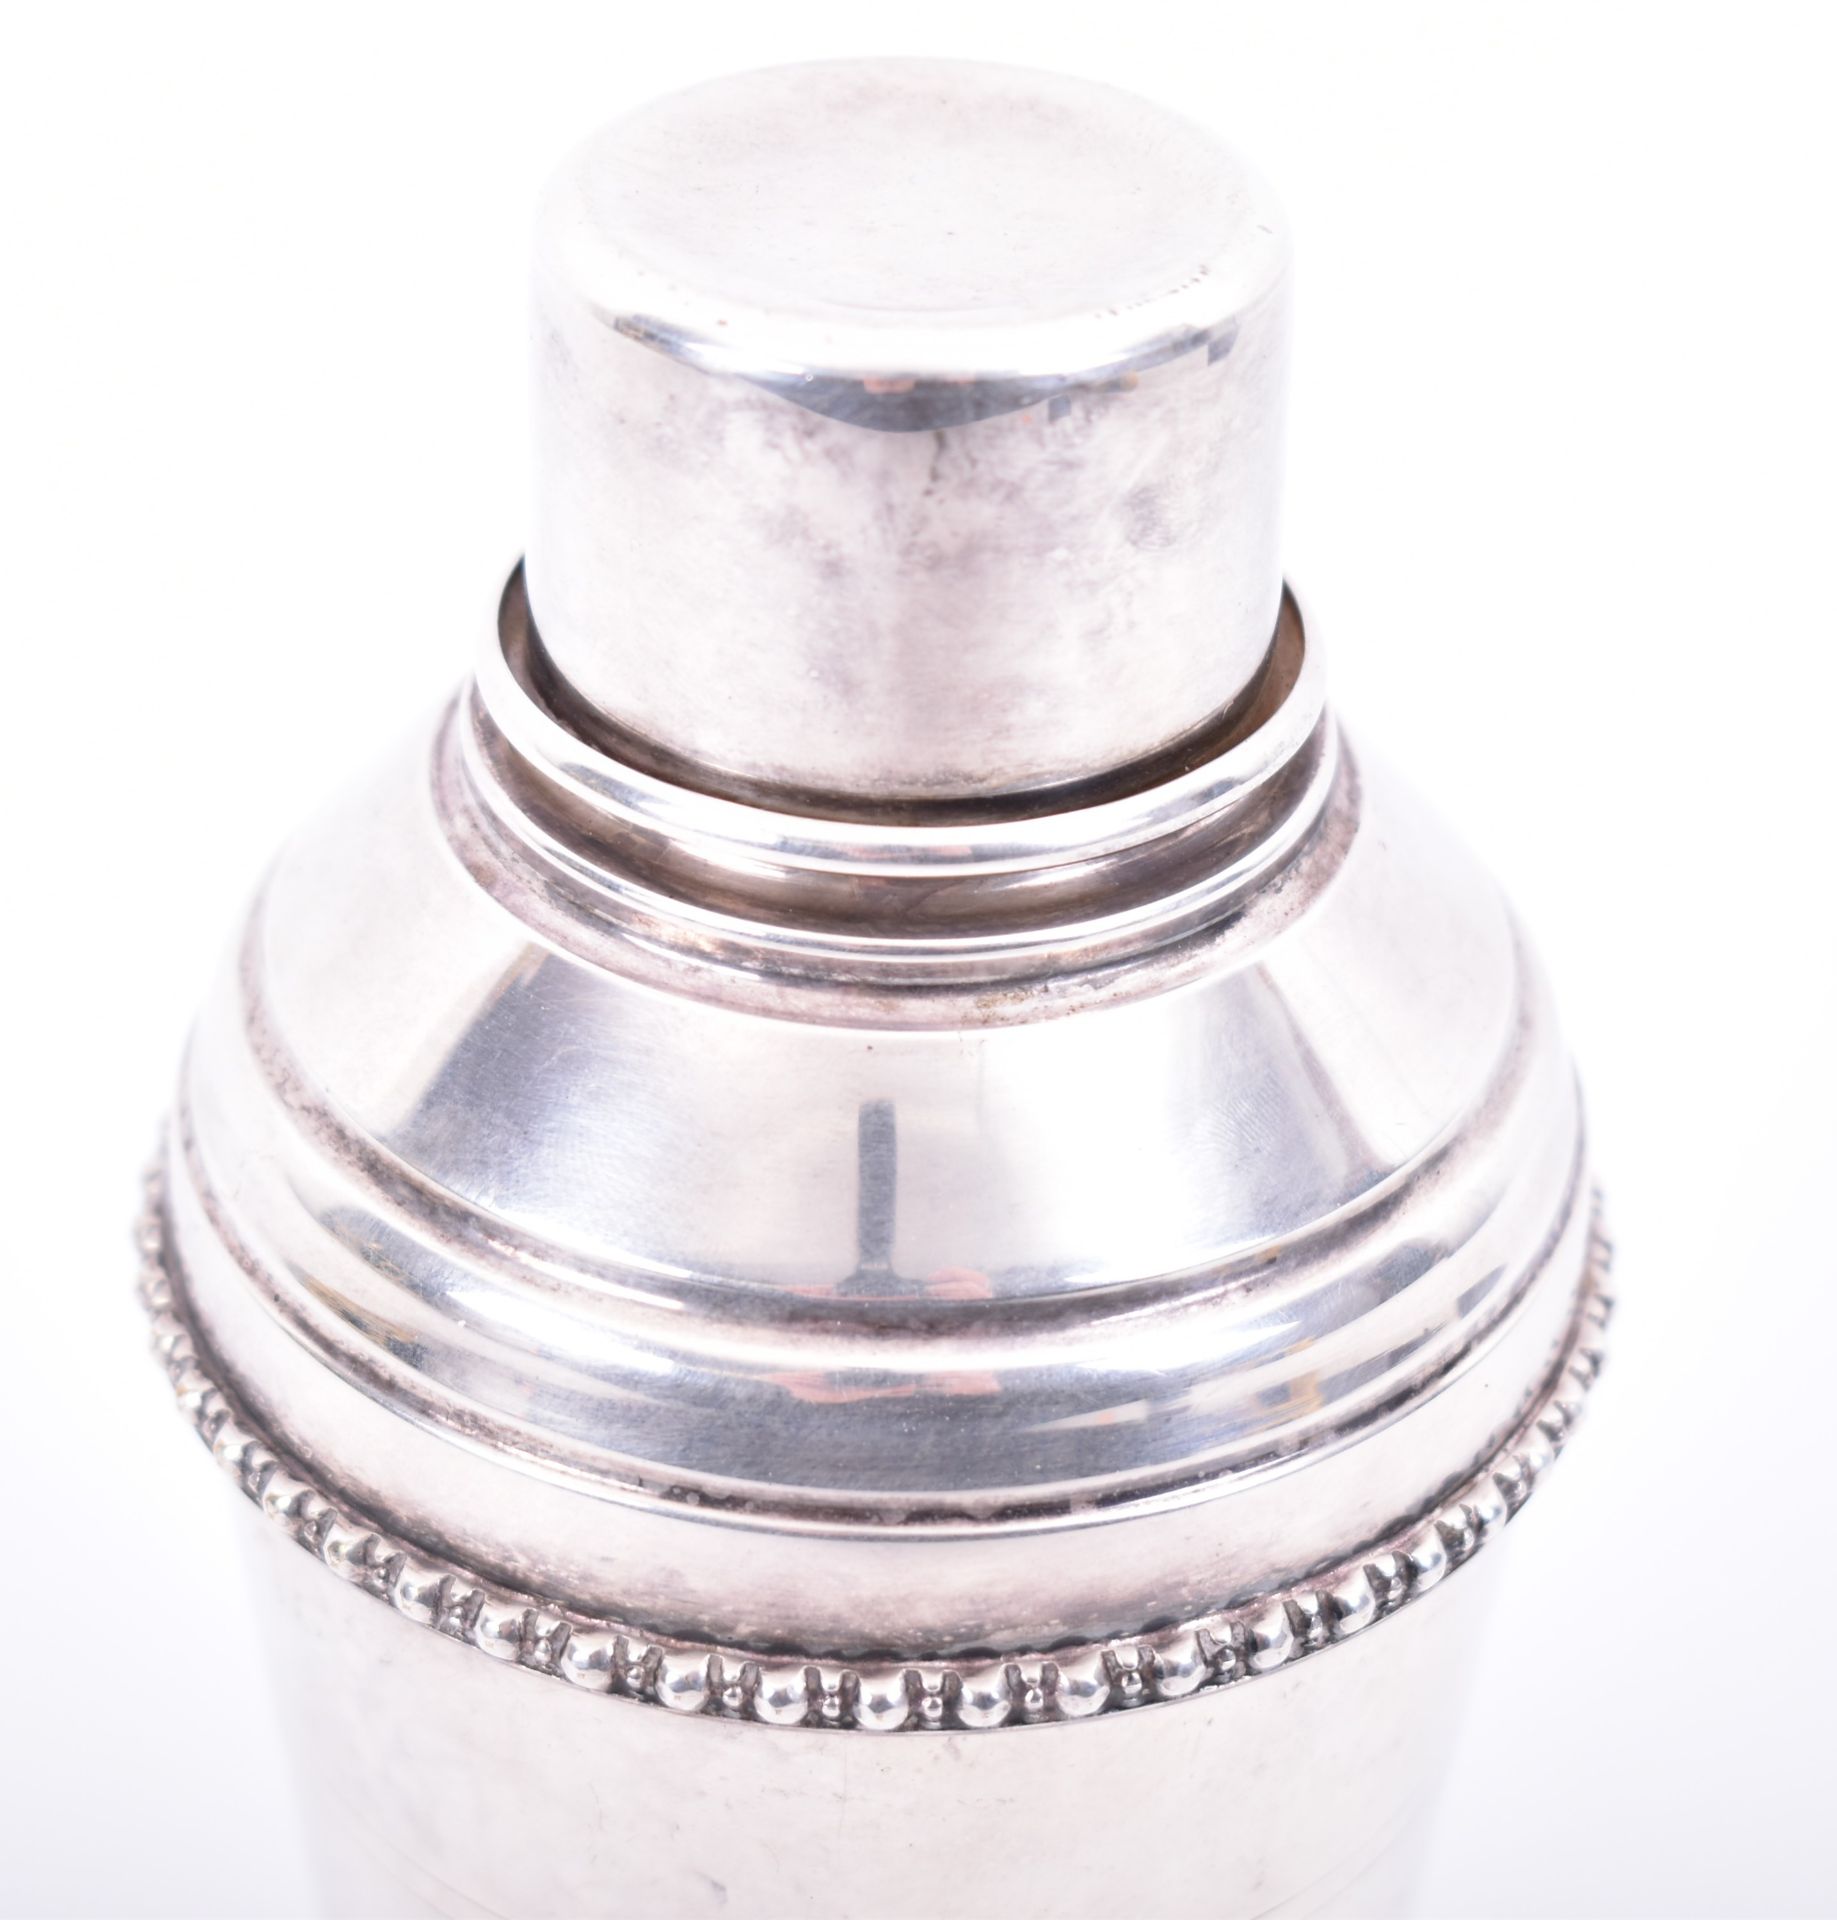 1930s ART DECO SILVER PLATE COCKTAIL DRINKS SHAKER - Image 2 of 6